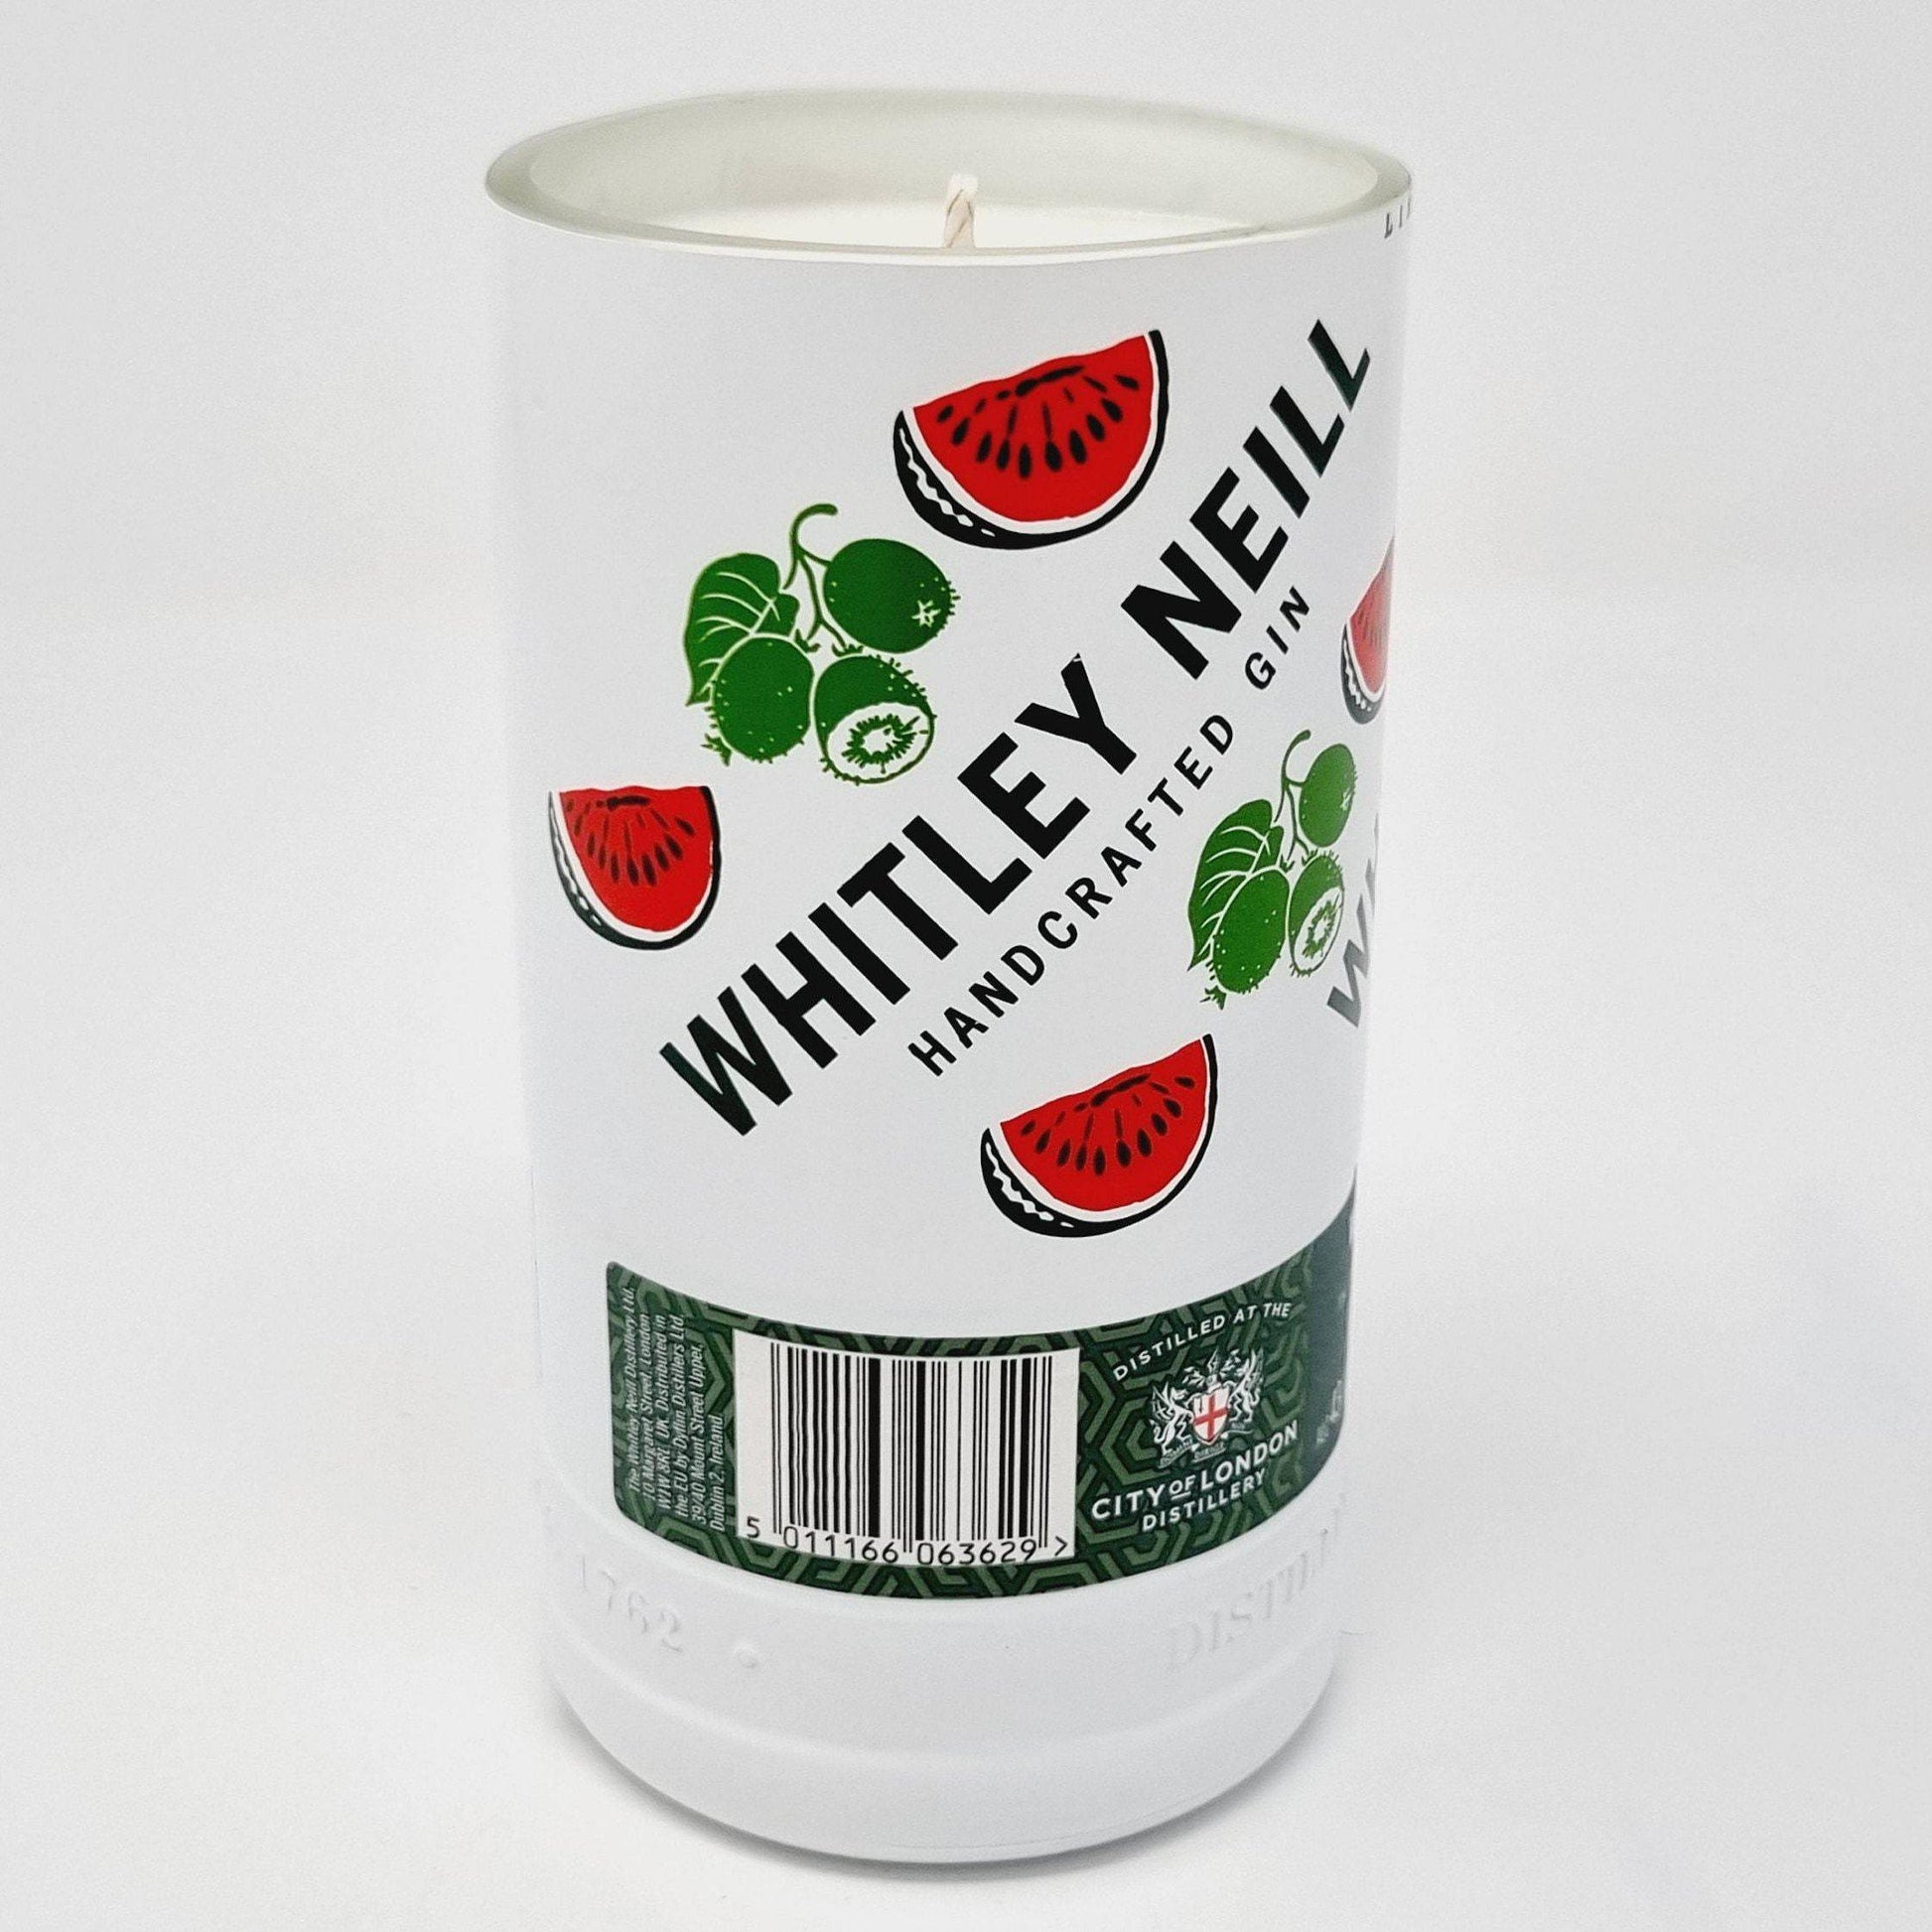 Whitley Neill Watermelon and Kiwi Gin Bottle Candle-Adhock Homeware